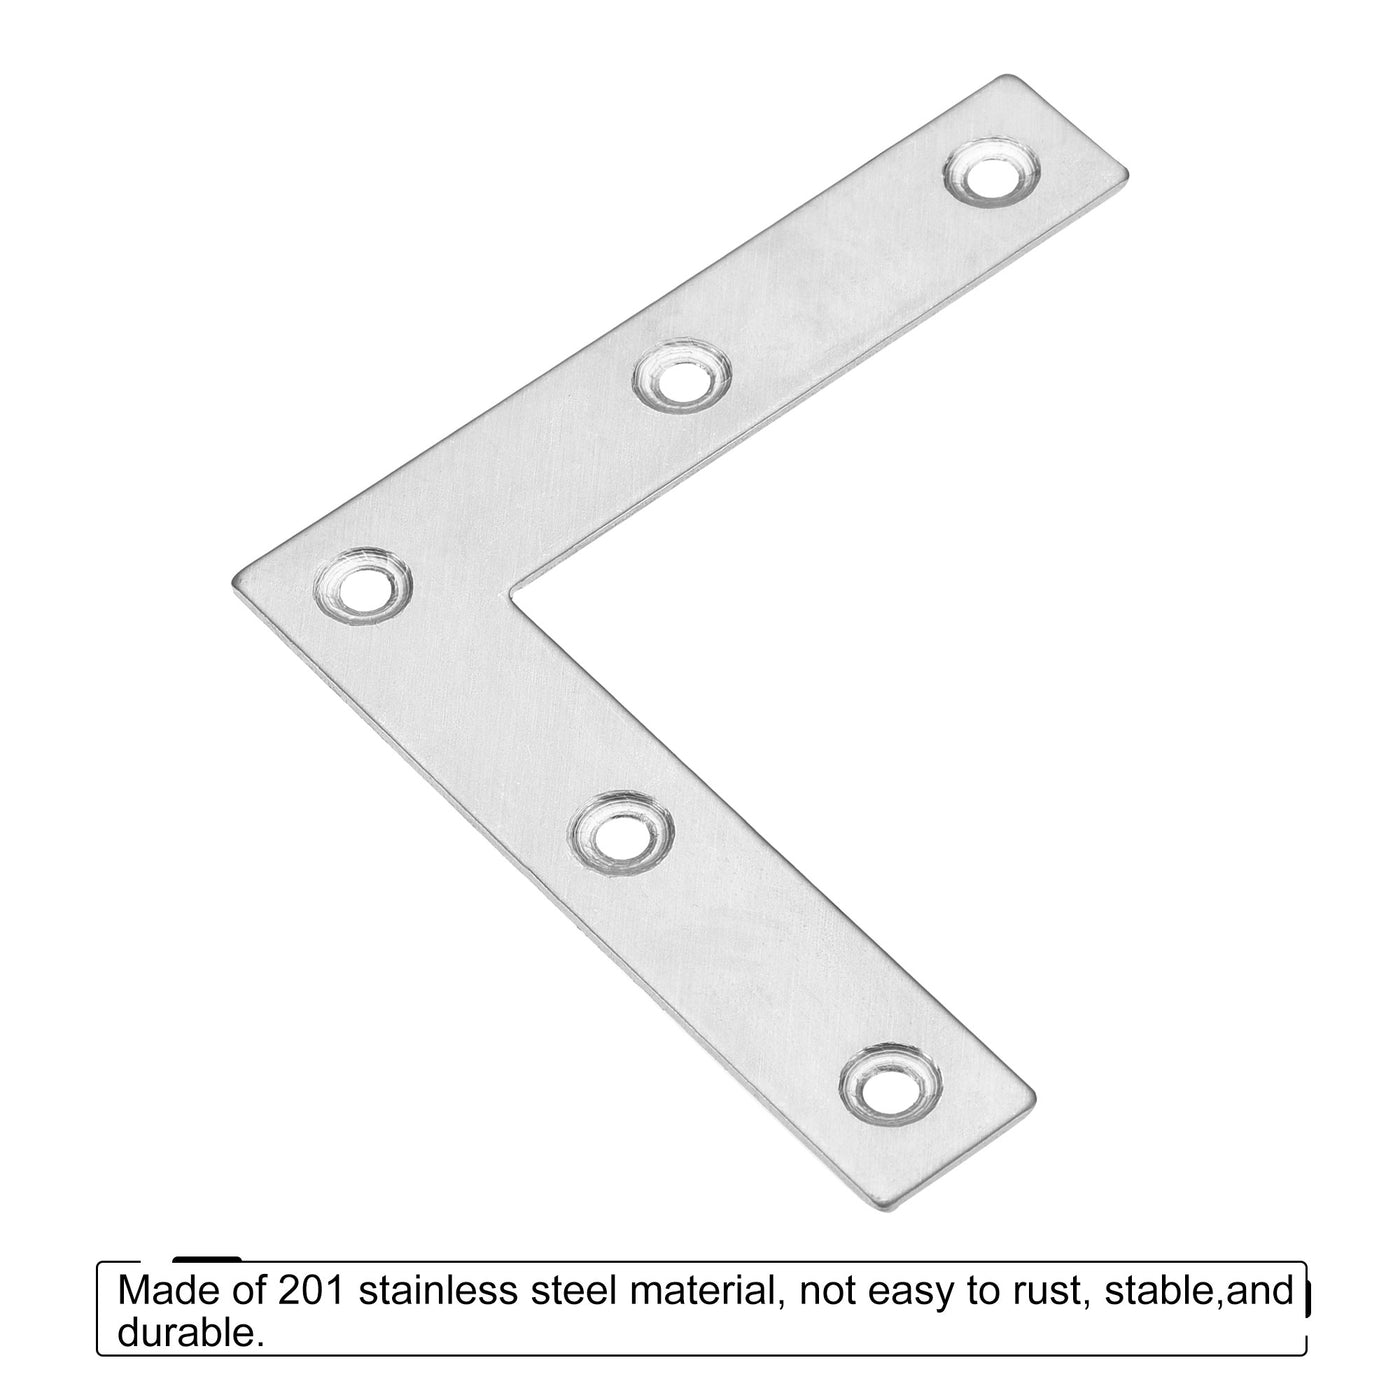 uxcell Uxcell L Shape Brace 80x80x1.3mm Stainless Steel Mending Repairing Flat Brackets for Joint Fastener with Screws 8Pcs